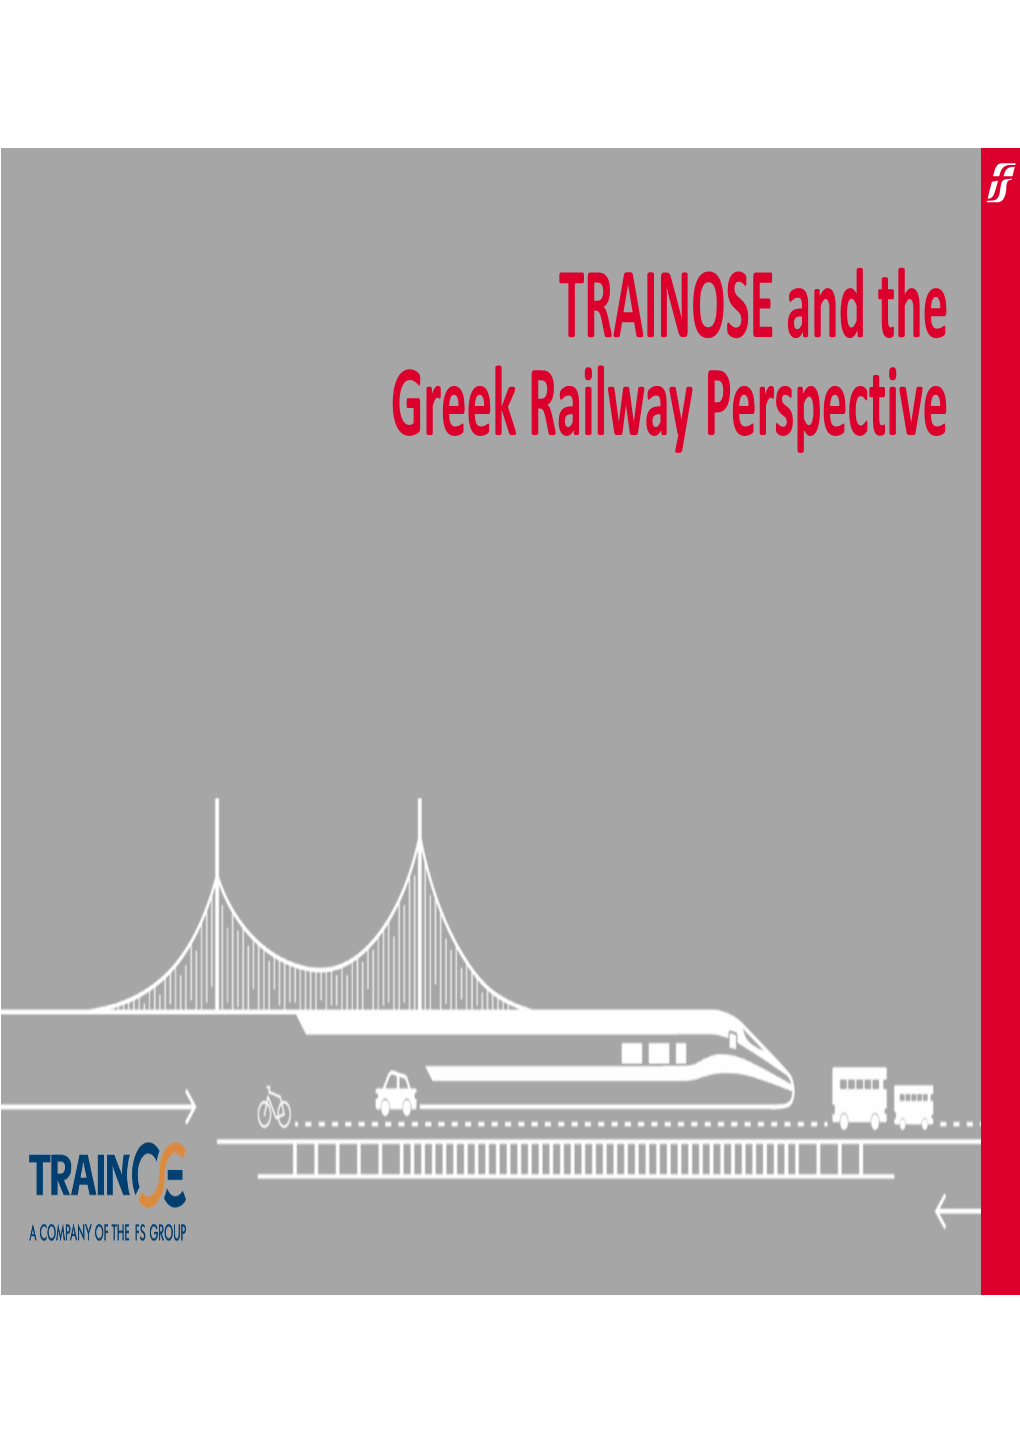 TRAINOSE and the Greek Railway Perspective TRAINOSE’S Financial Results Are Driven by a Number of Major Changes Across the Network